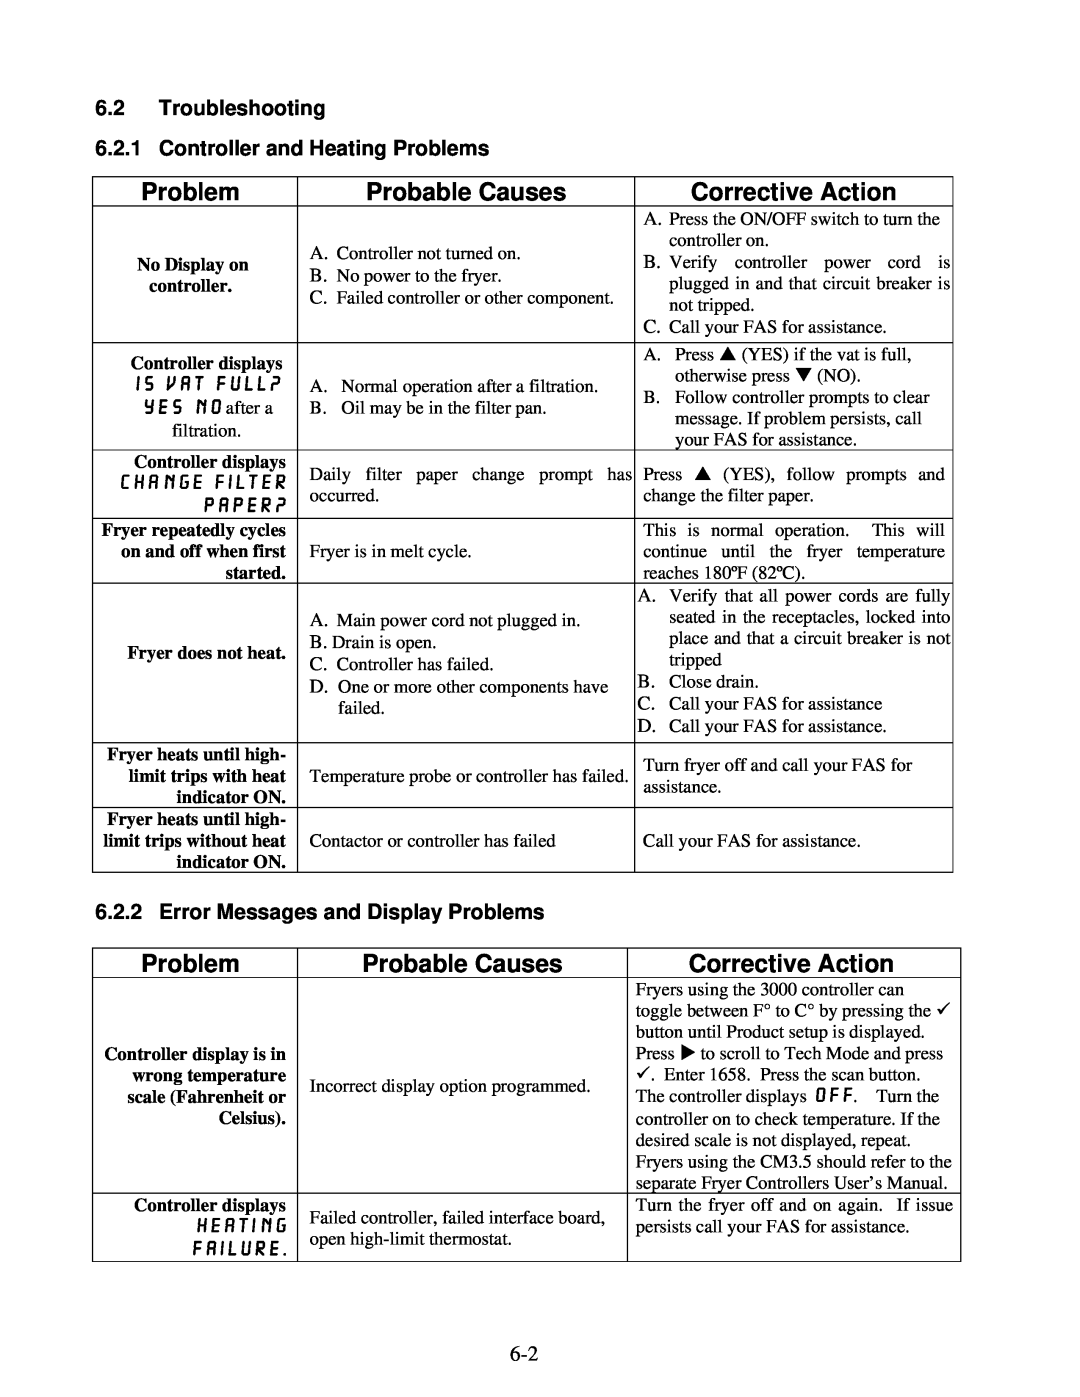 Frymaster OCF30 operation manual Problem, Probable Causes, Corrective Action 